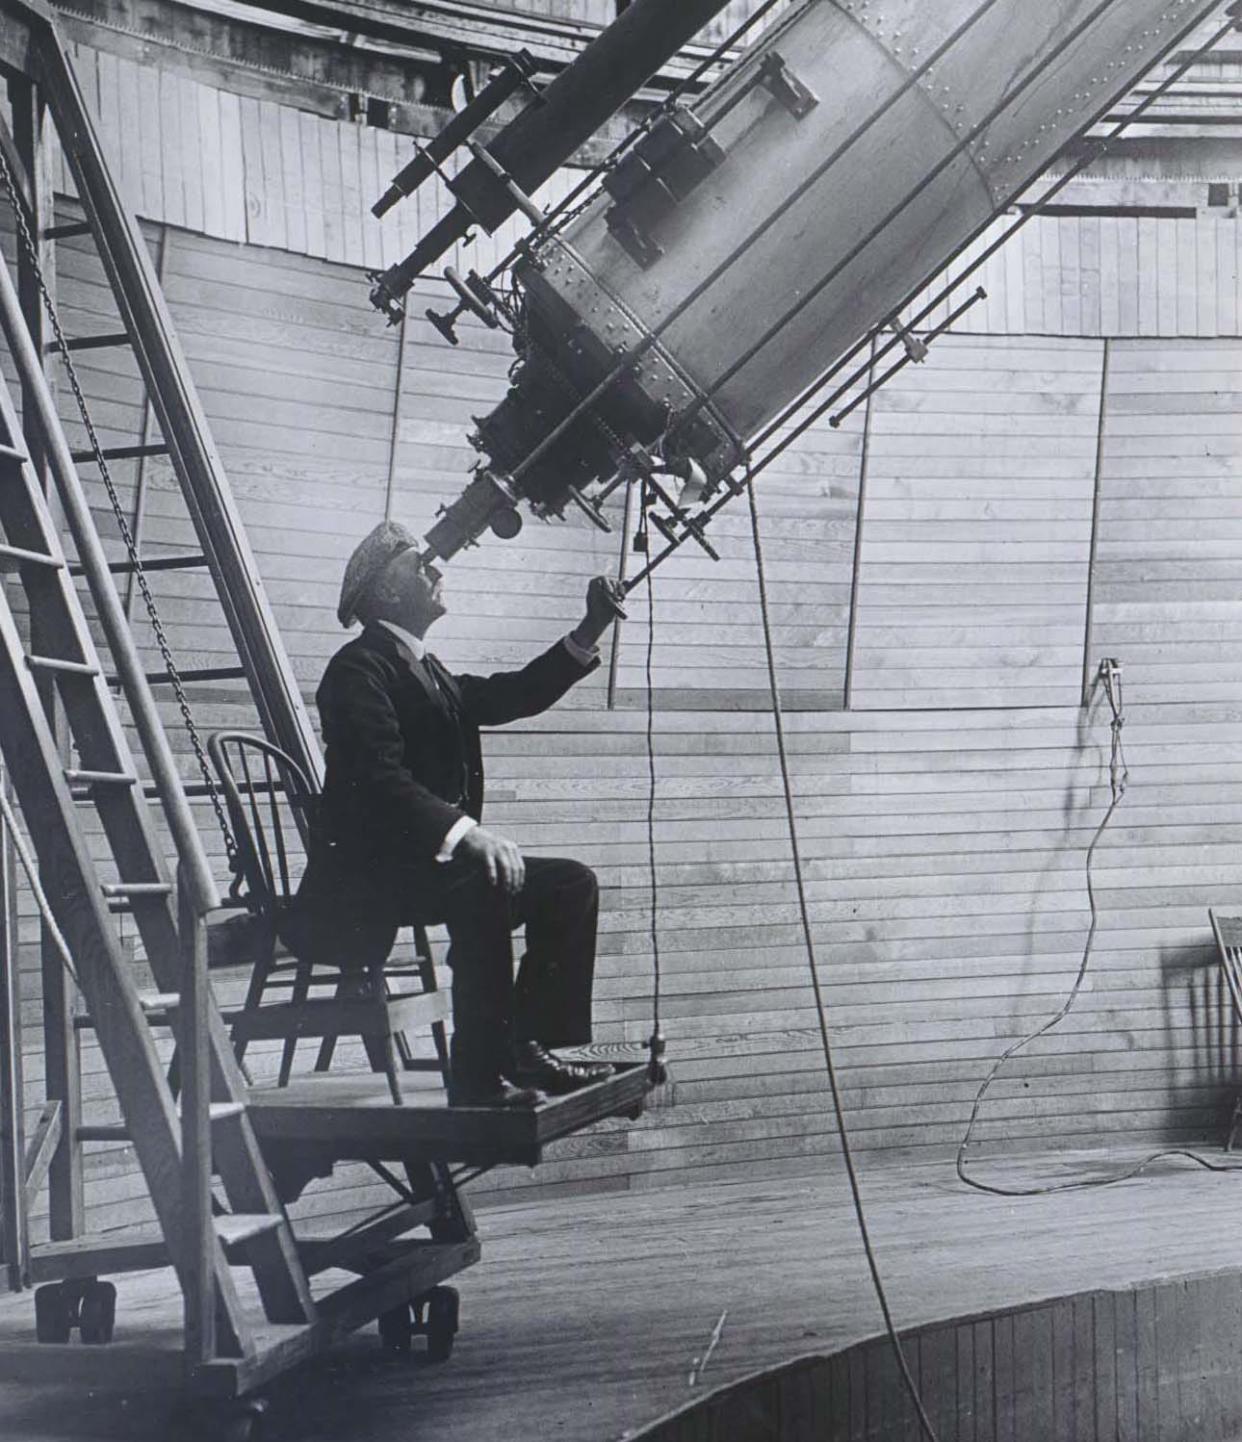 The Lowell Observatory in Arizona, founded by Percival Lowell, is where the planet Pluto was discovered in 1930.